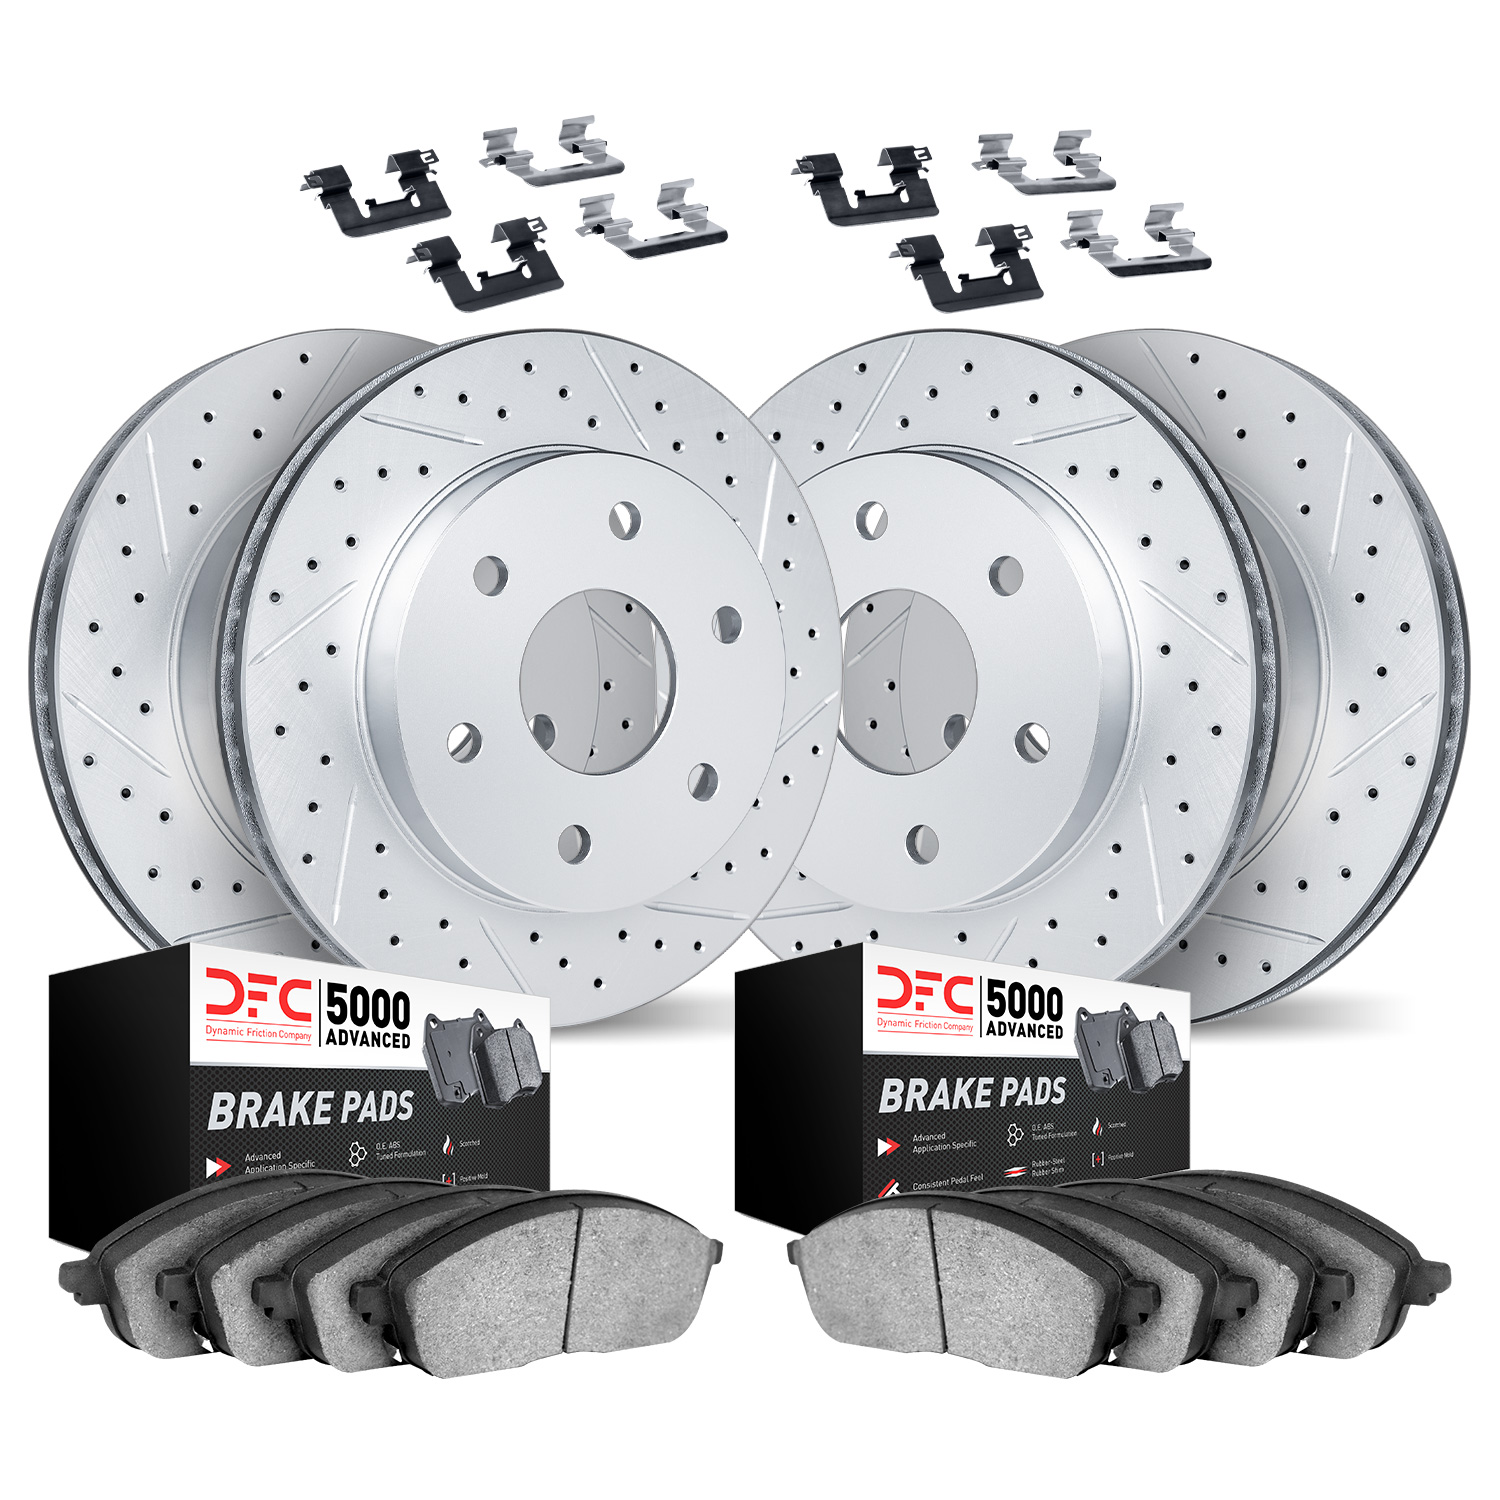 2514-48027 Geoperformance Drilled/Slotted Rotors w/5000 Advanced Brake Pads Kit & Hardware, 2002-2005 GM, Position: Front and Re